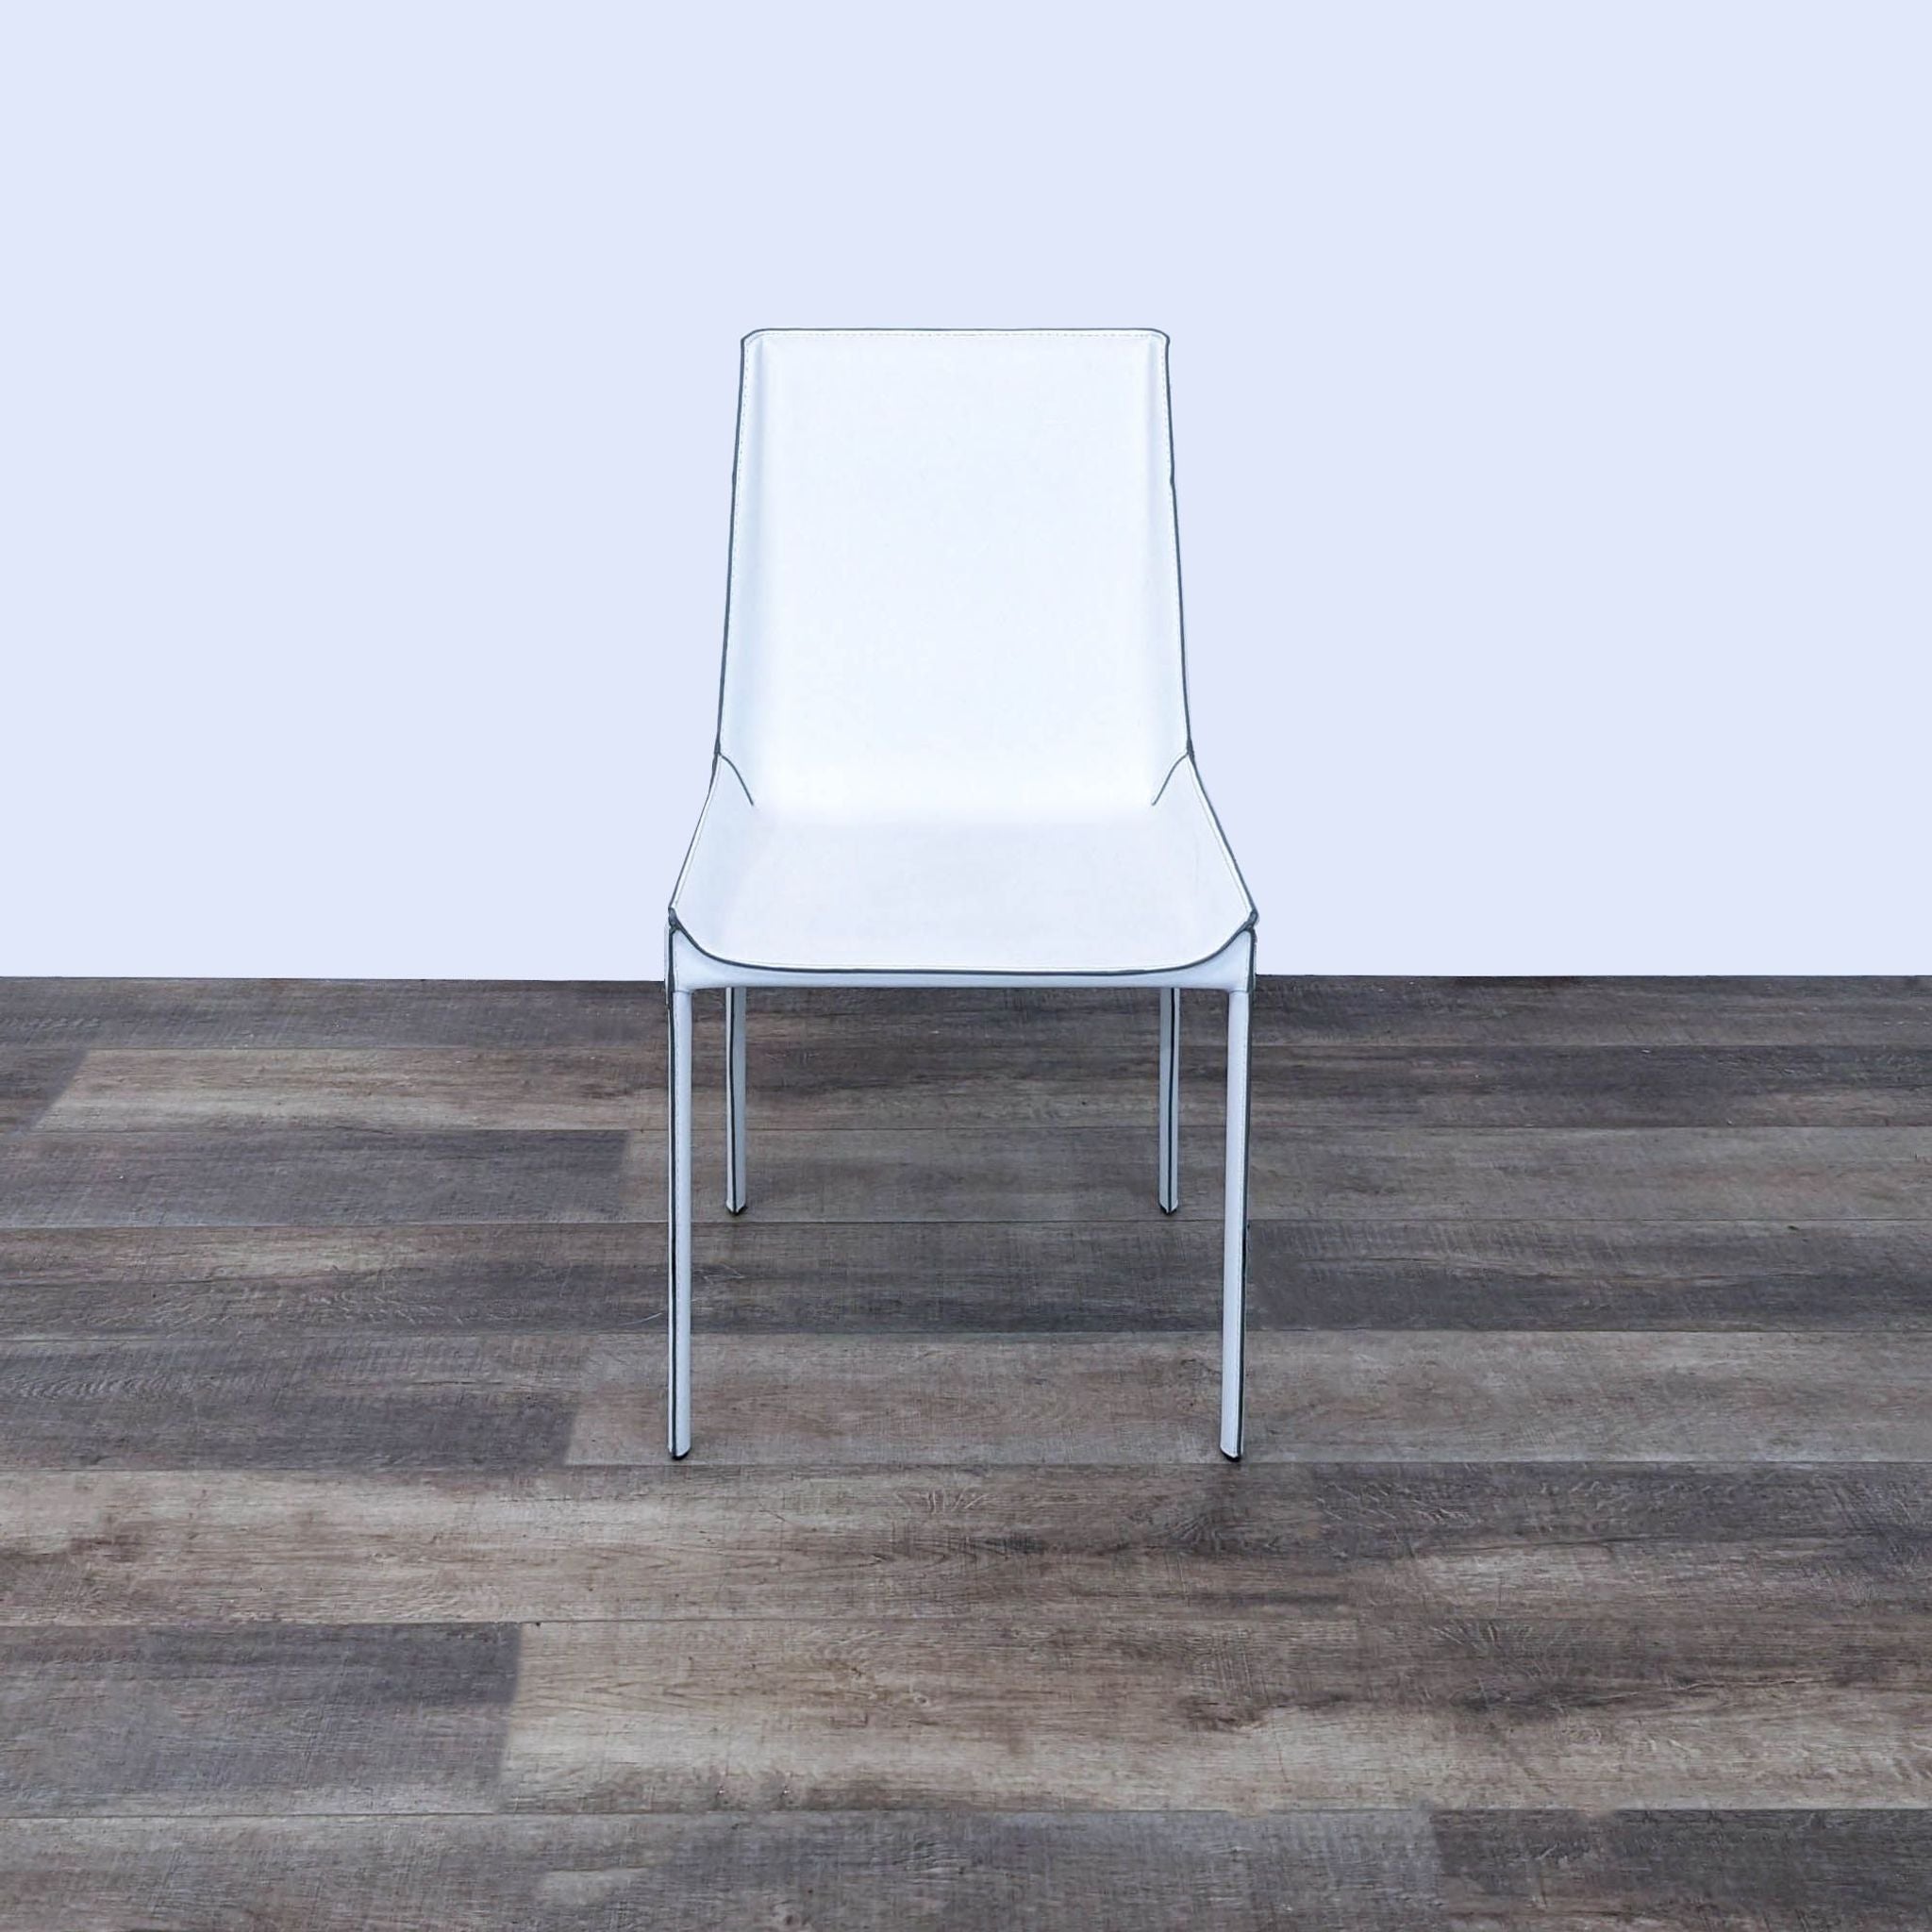 Zuo Modern slim profile Fashion dining chair with recycled leather and exposed seams, high back and metal legs, on wooden floor.